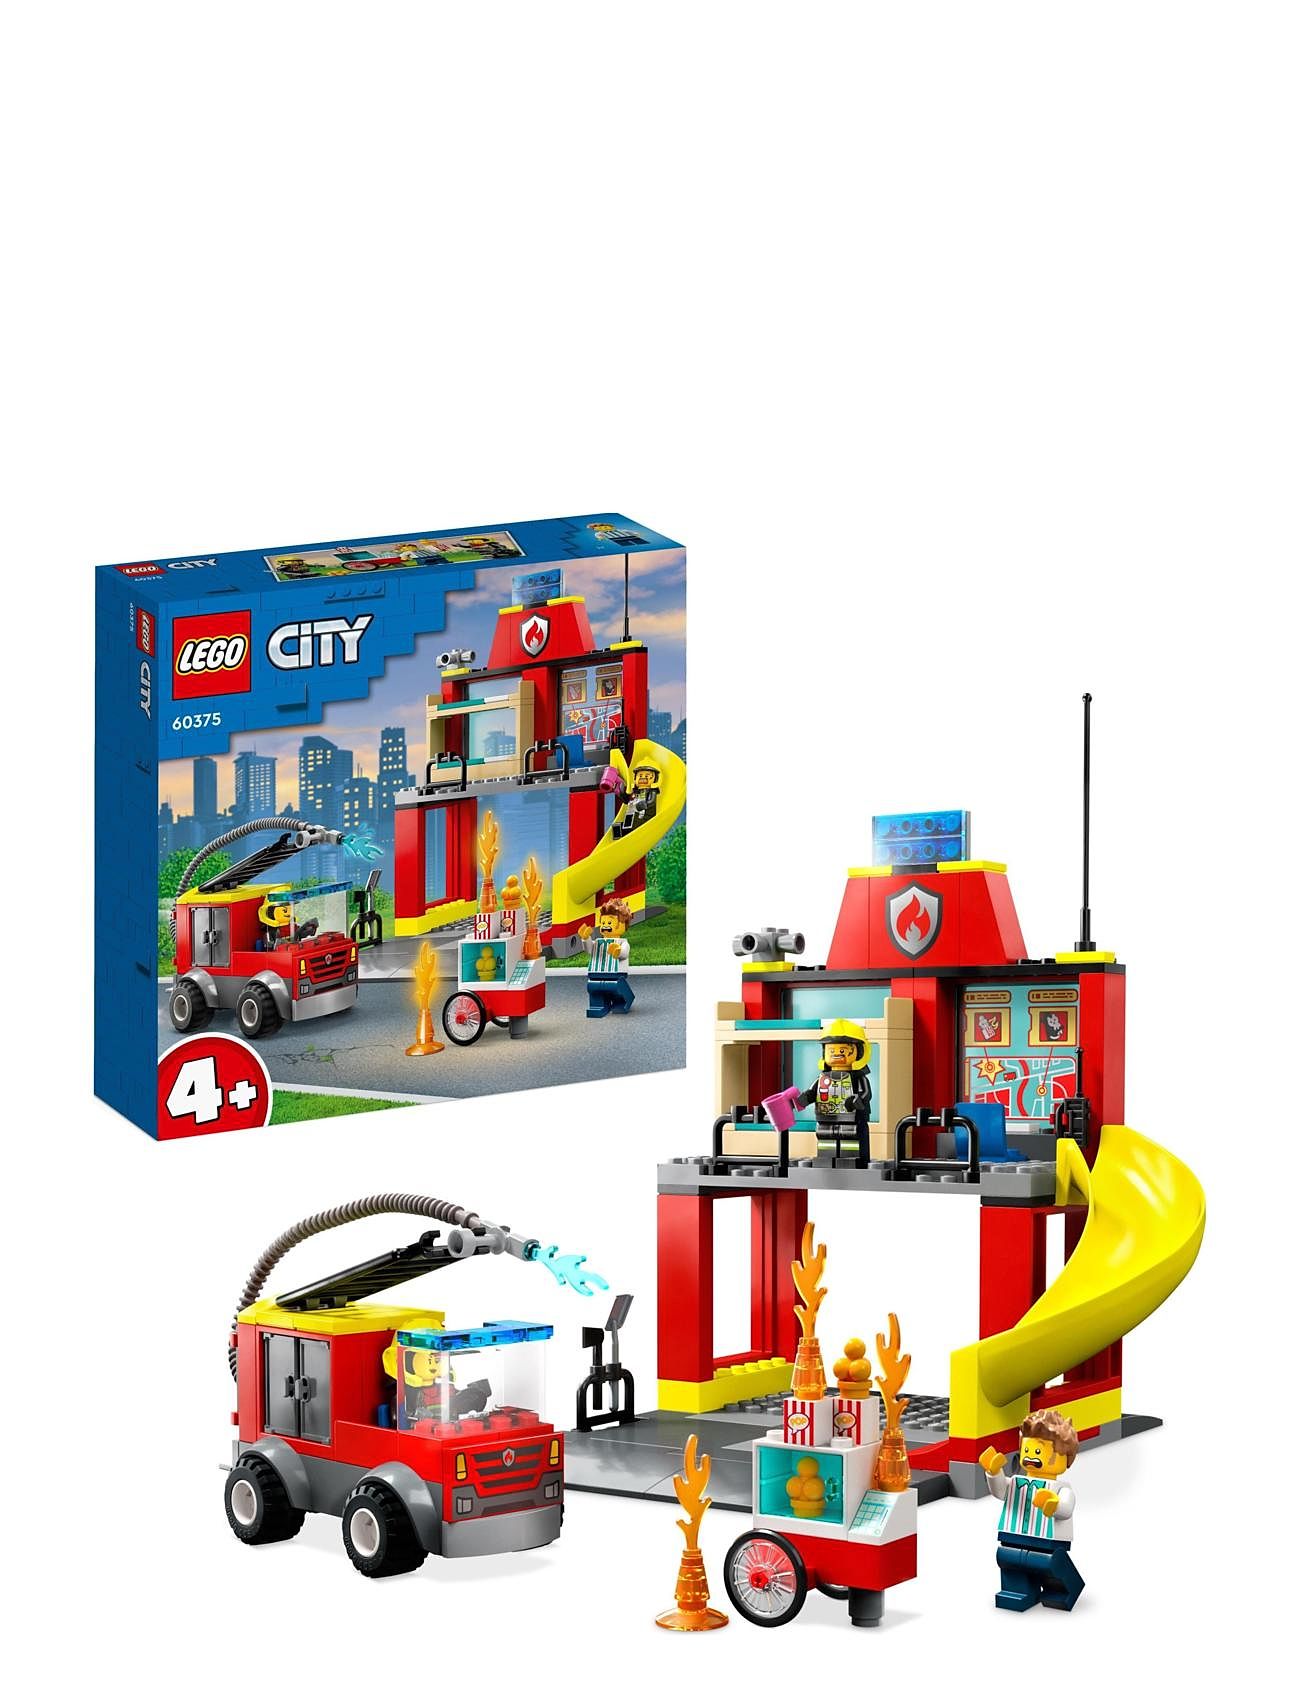 4+ Fire Station And Fire Engine Toy Playset Toys Lego Toys Lego city Multi/patterned LEGO